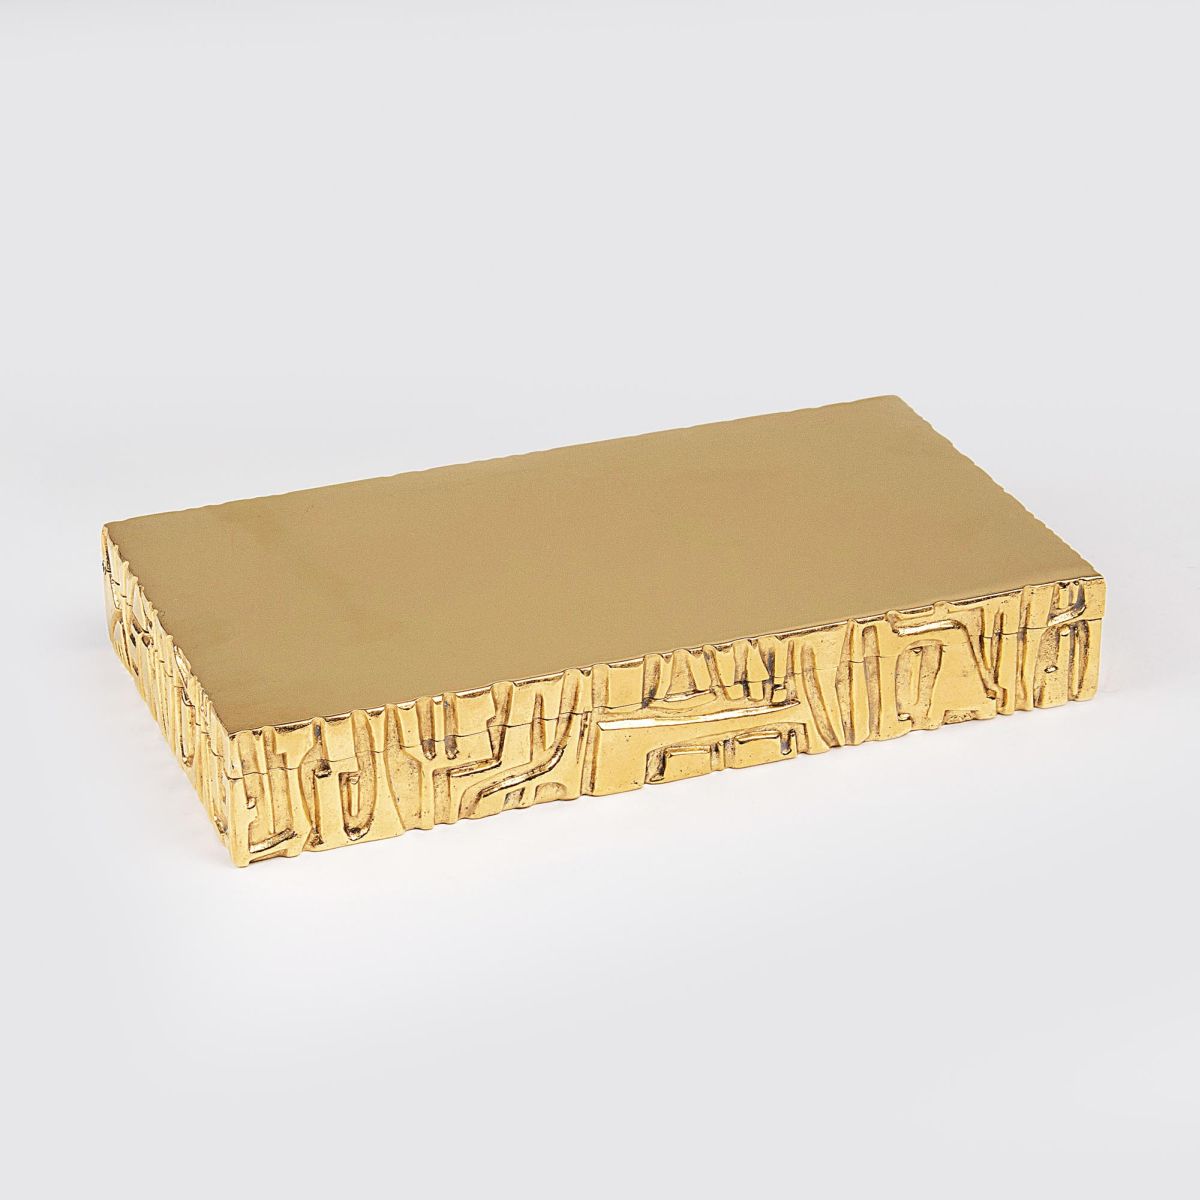 An extraordinary gilded box by Jeweller Meister